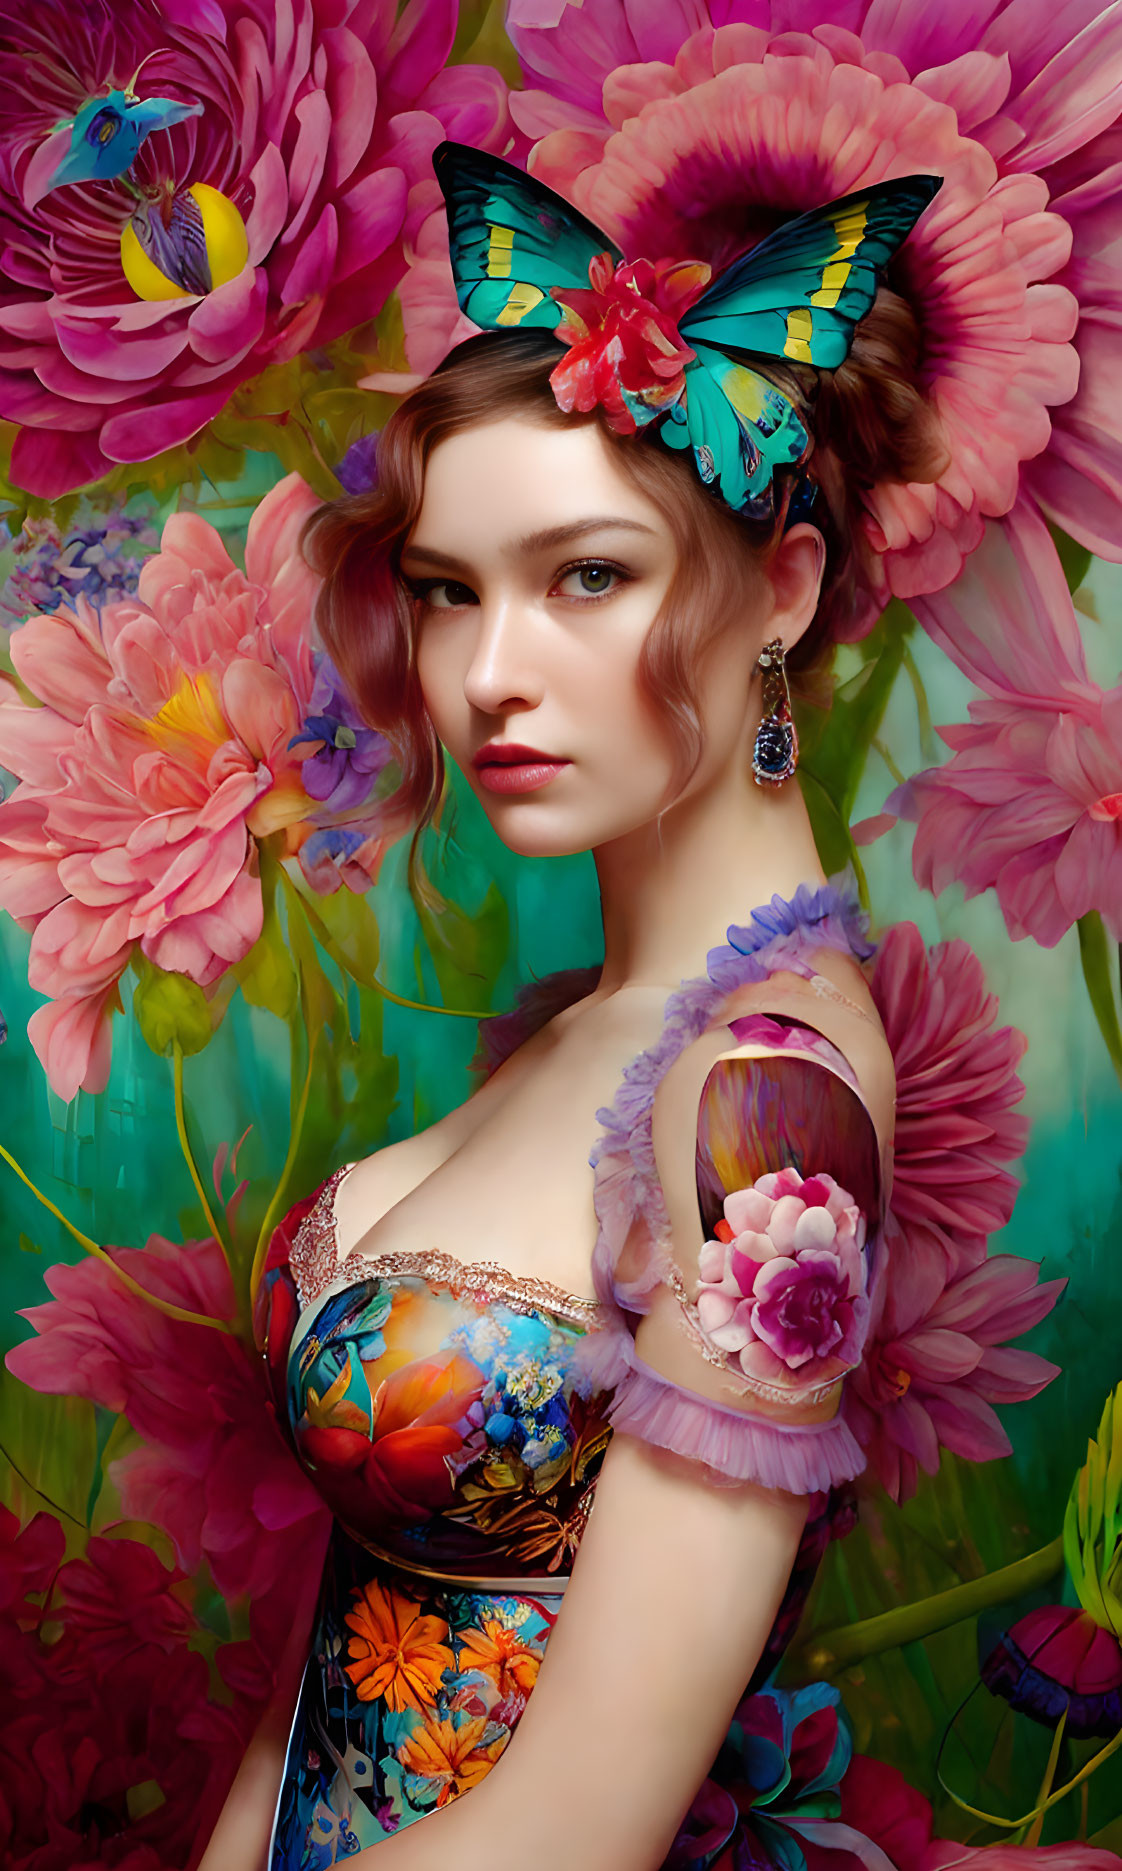 Woman with Butterfly Headpiece Surrounded by Vibrant Flowers and Peony Dress